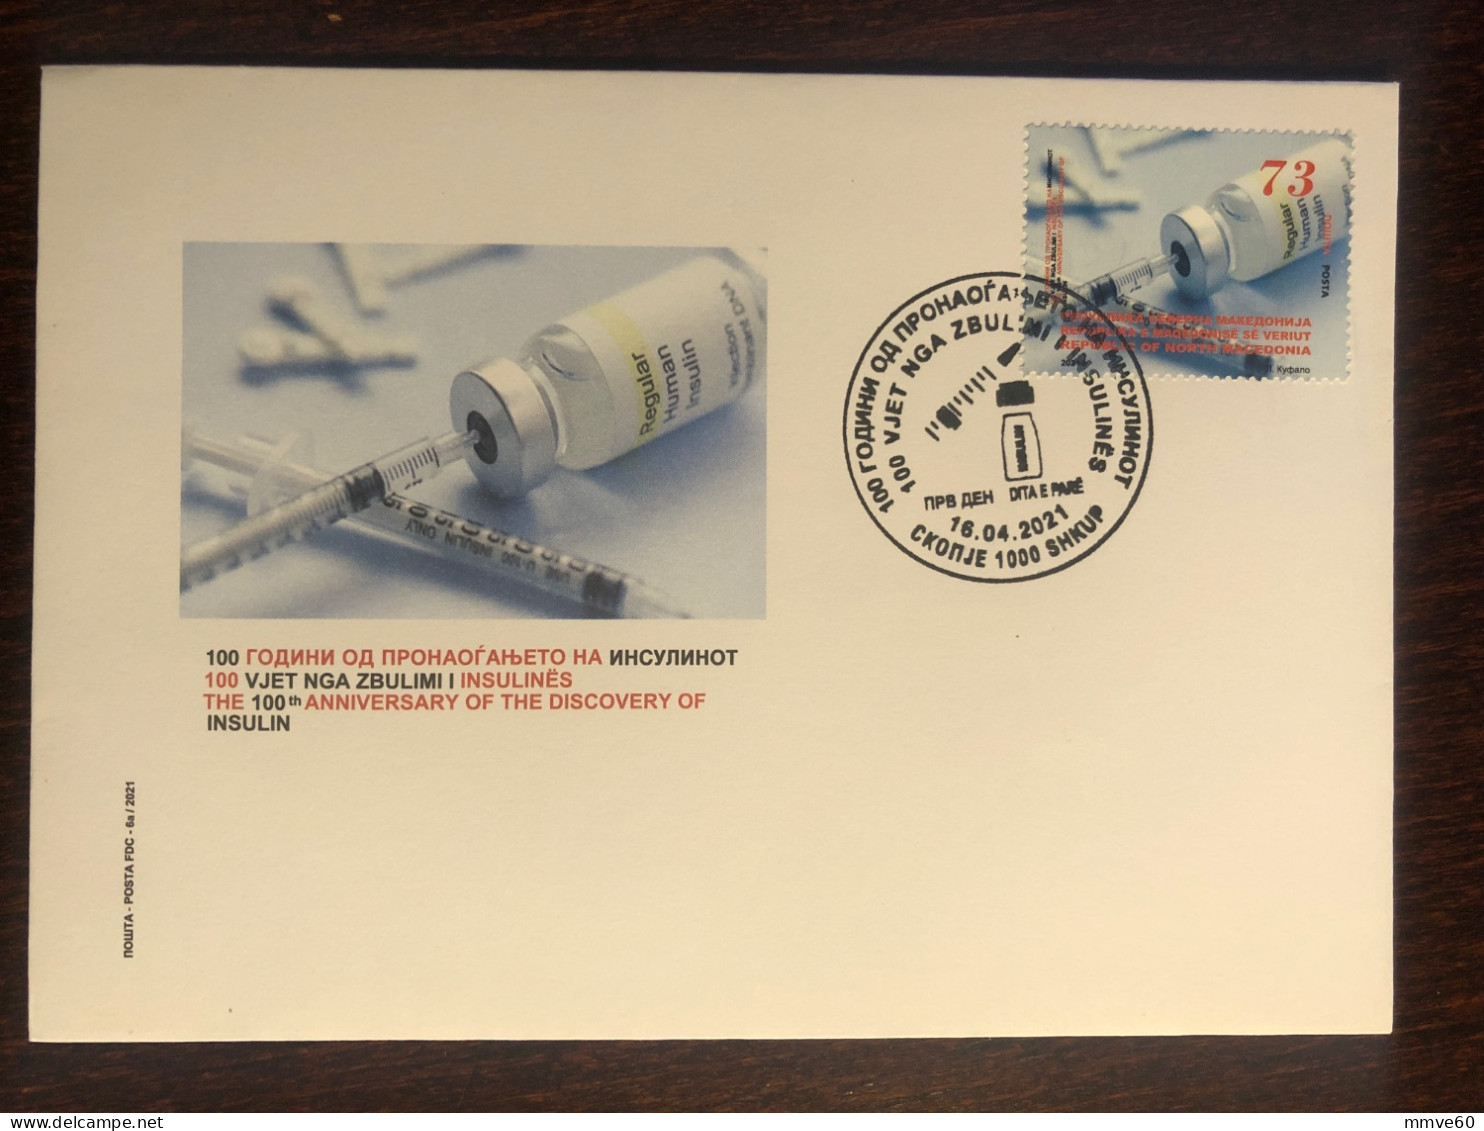 MACEDONIA FDC COVER 2021 YEAR DIABETES INSULIN HEALTH MEDICINE STAMPS - North Macedonia